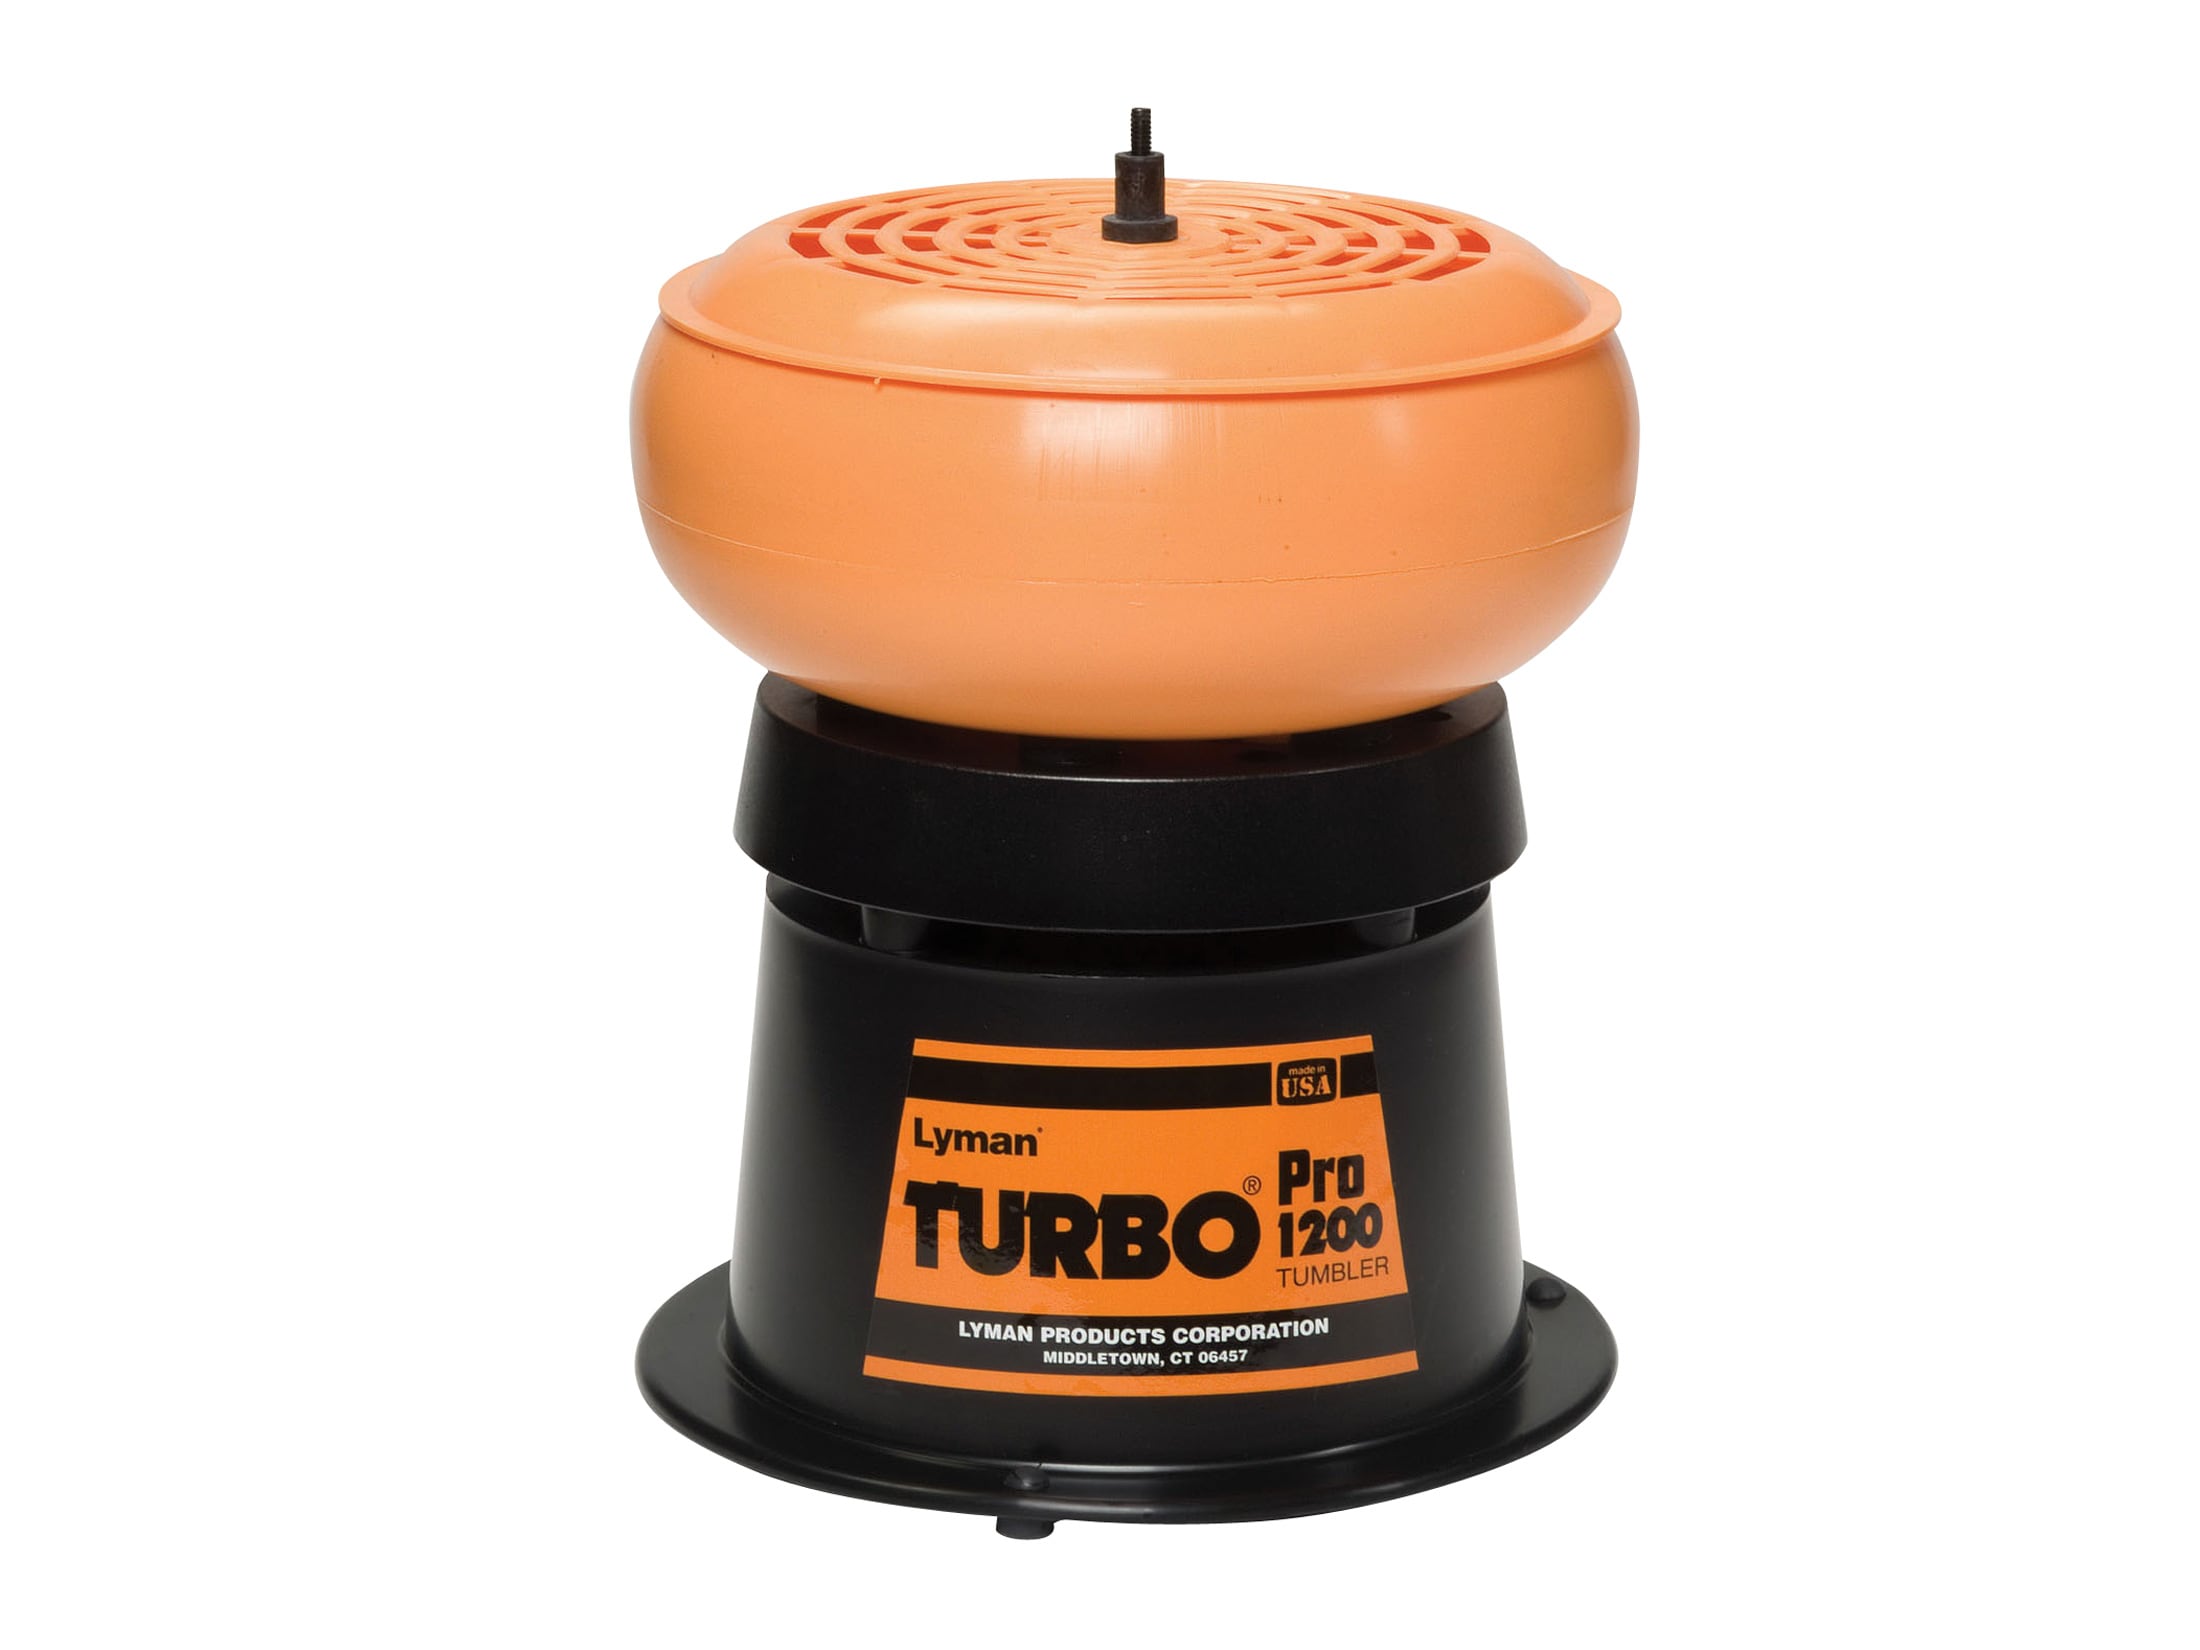 Lyman Turbo 1200 PRO Sifter Case Tumbler For Sale